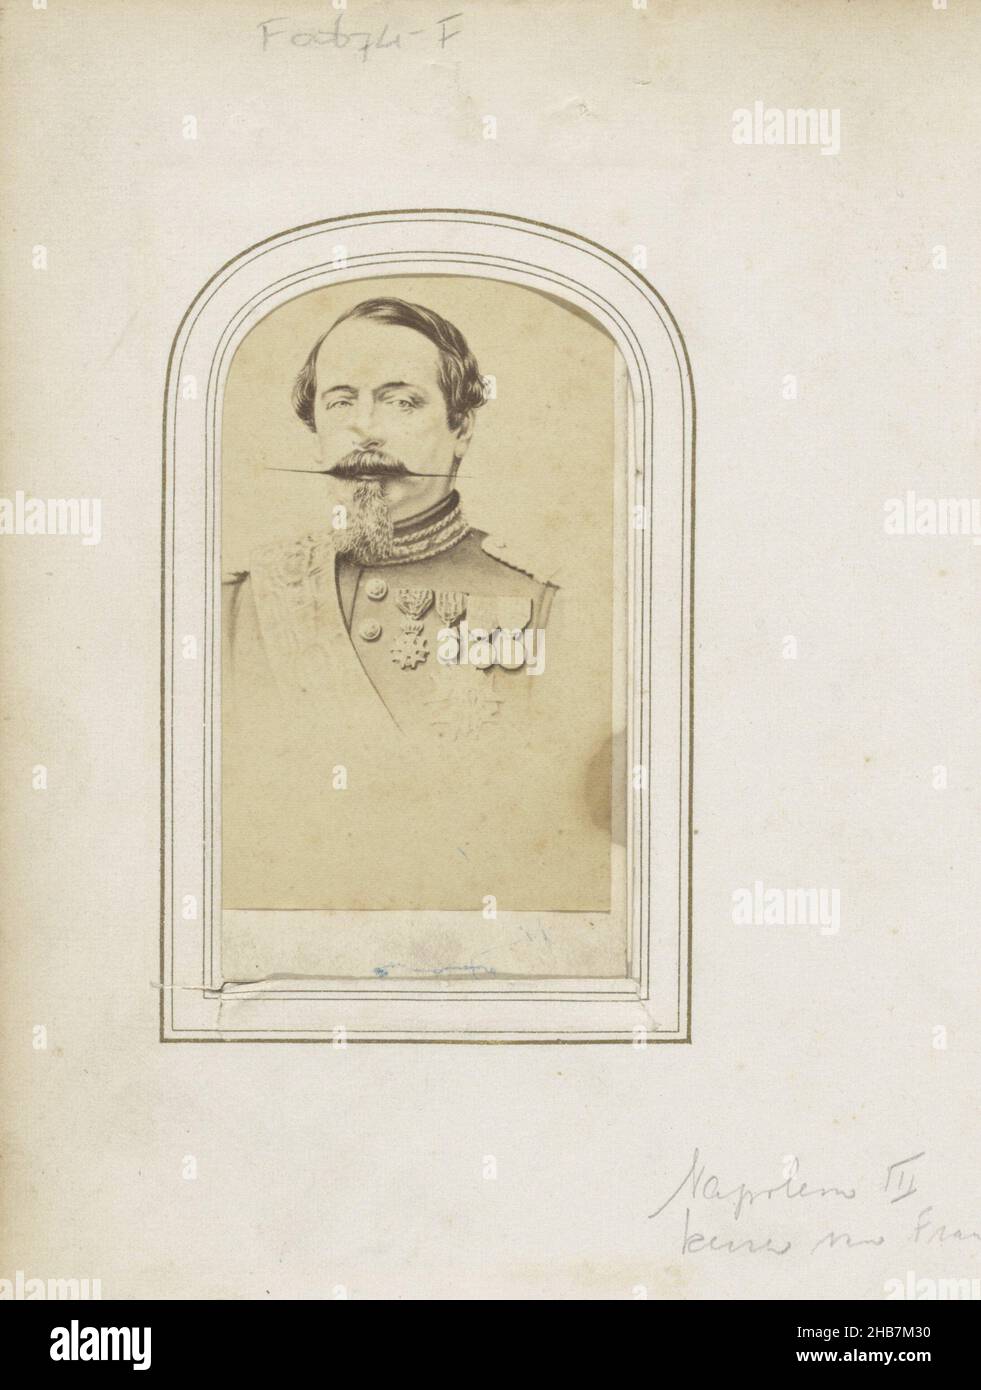 Portrait of Napoleon III Bonaparte, Emperor of France, Part of Photo album with 123 cartes-de-visite of members of European royal houses, politicians and well-known persons., anonymous, 1855 - 1871, cardboard, paper, albumen print, height 88 mm × width 51 mm Stock Photo